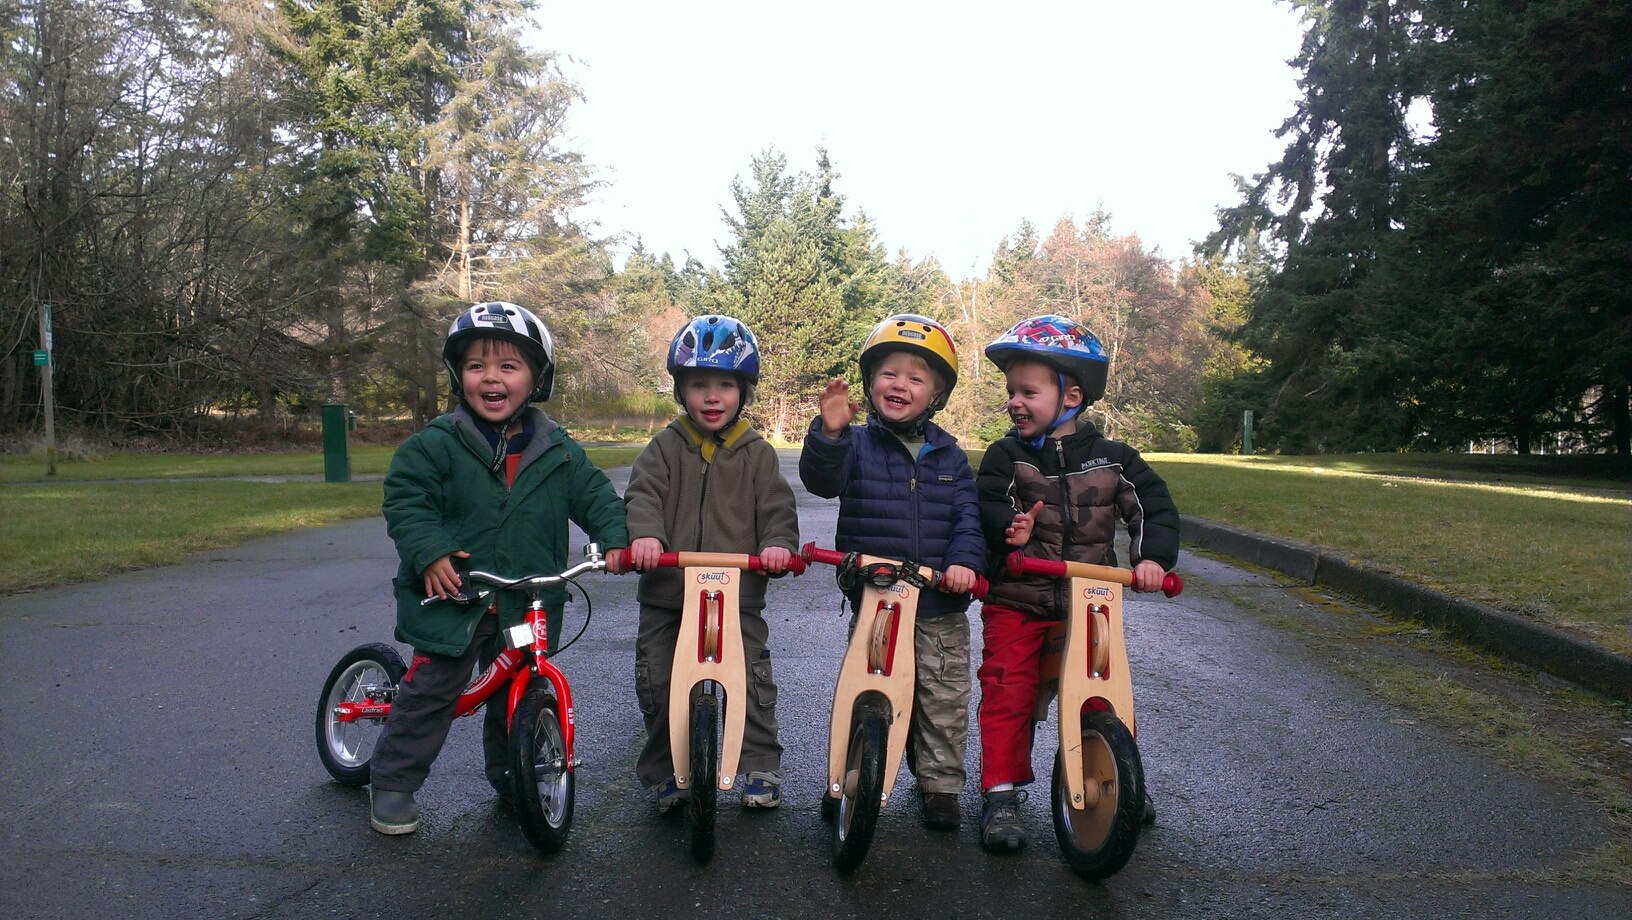 Toddlers on little bikes